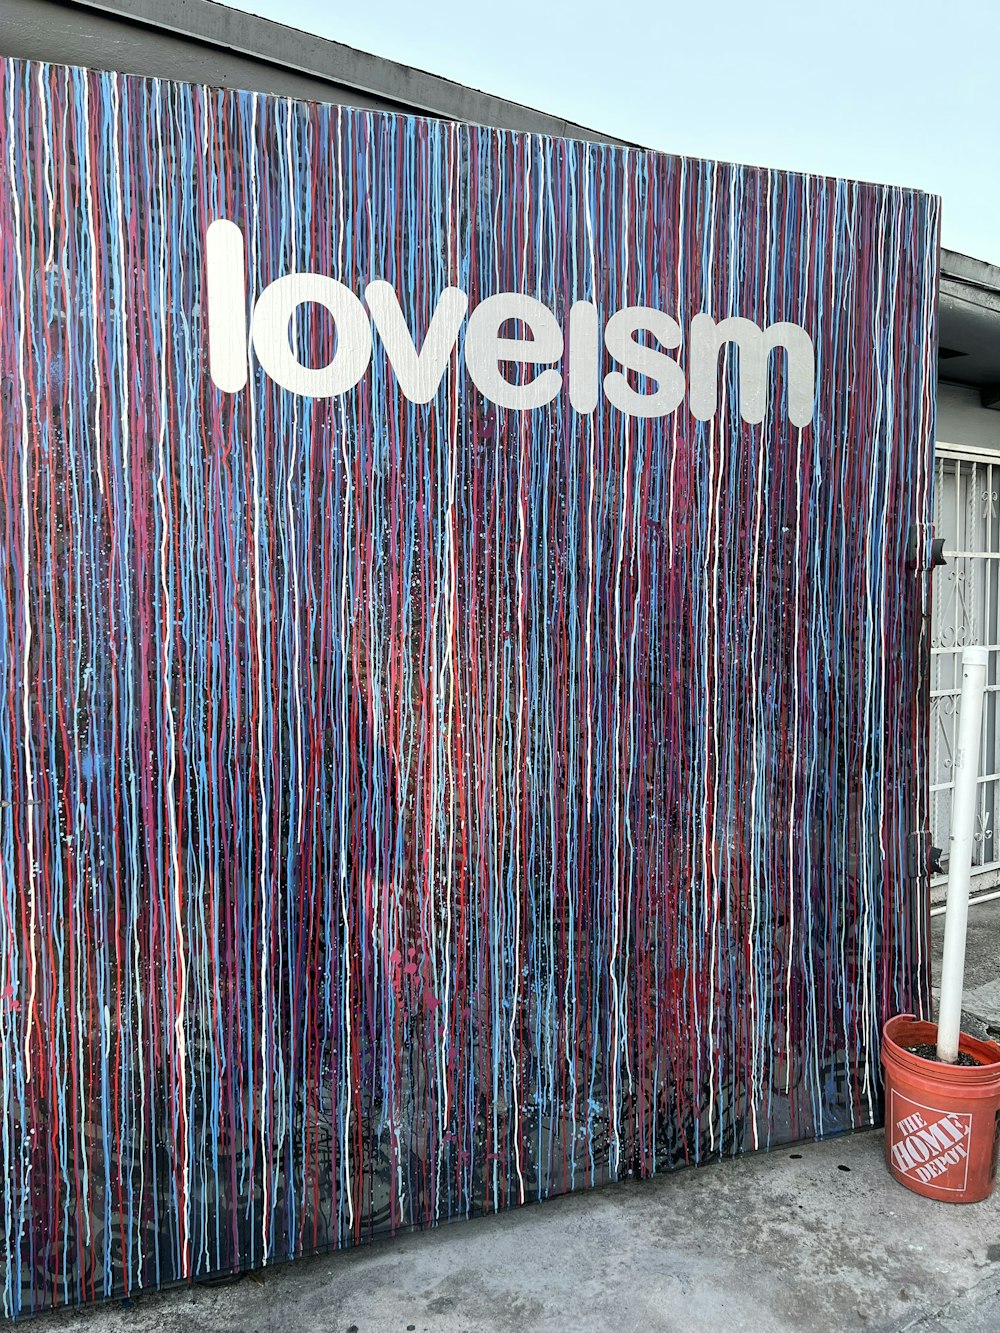 a wall that has a sign that says loveism on it